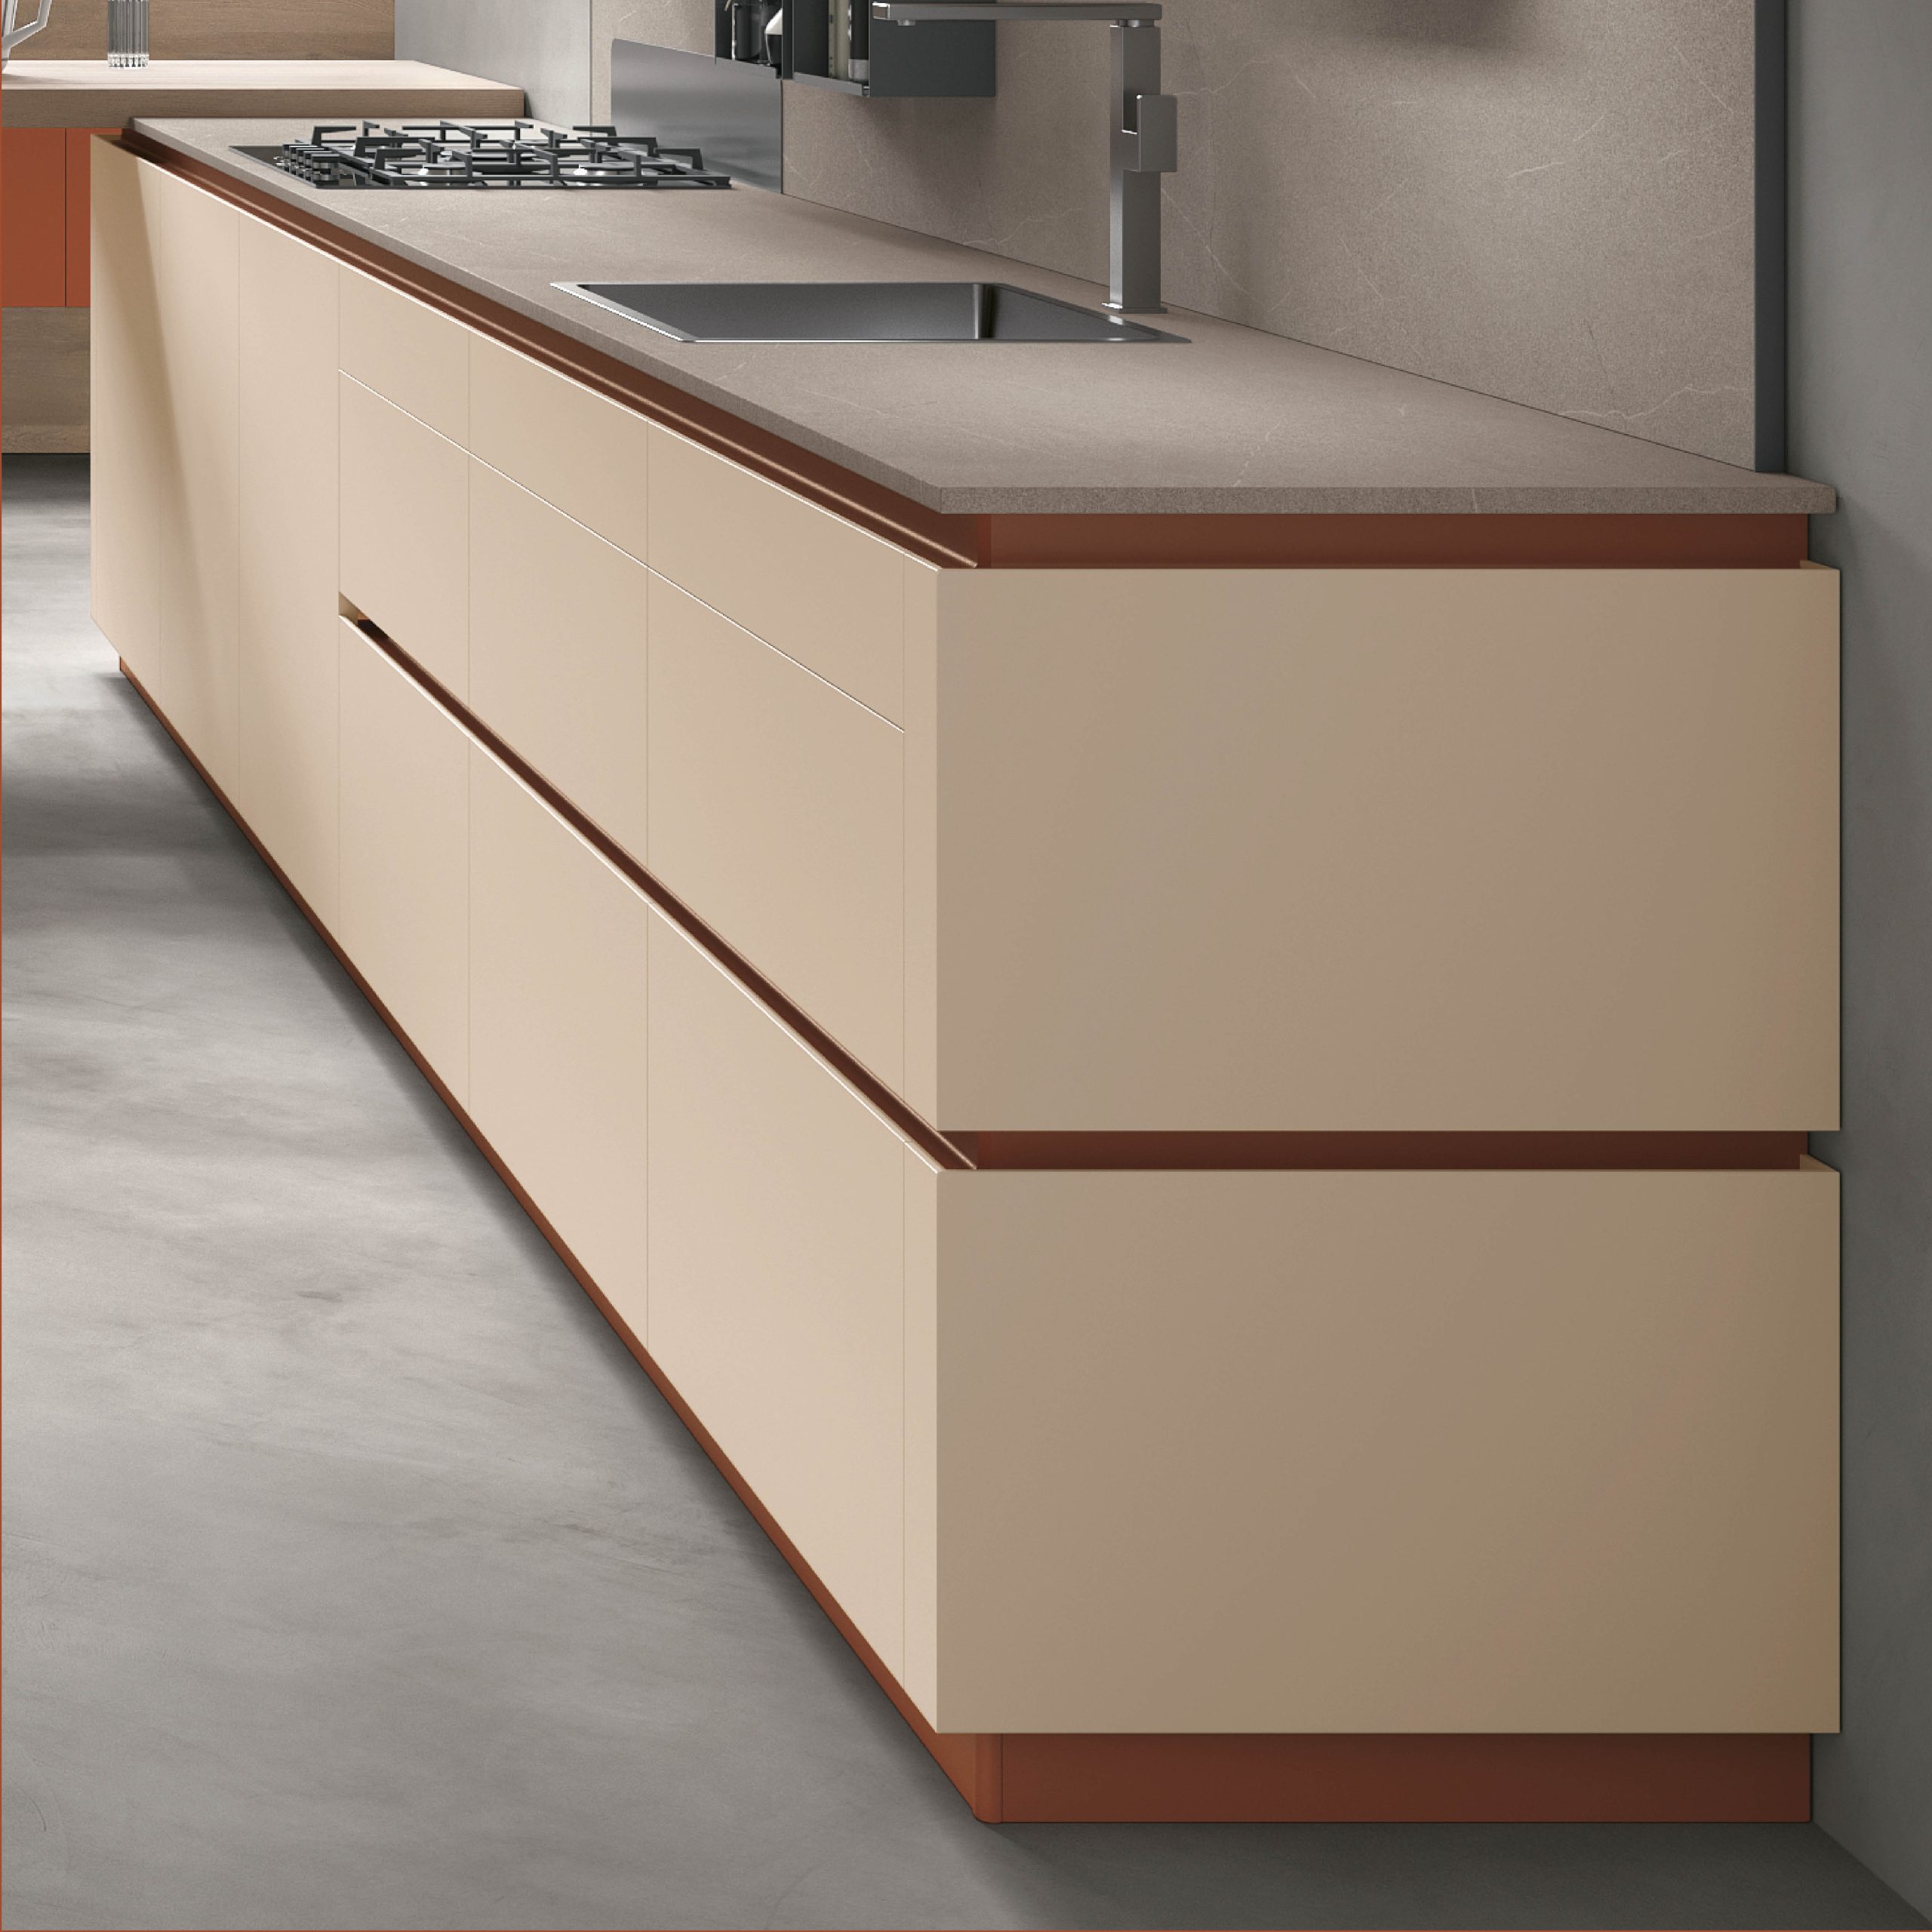 Modern Kitchens NYC - Color Trend - 7 Laccato Opaco Rosa Cipria2 Scaled 1 - Stosa Cucine
